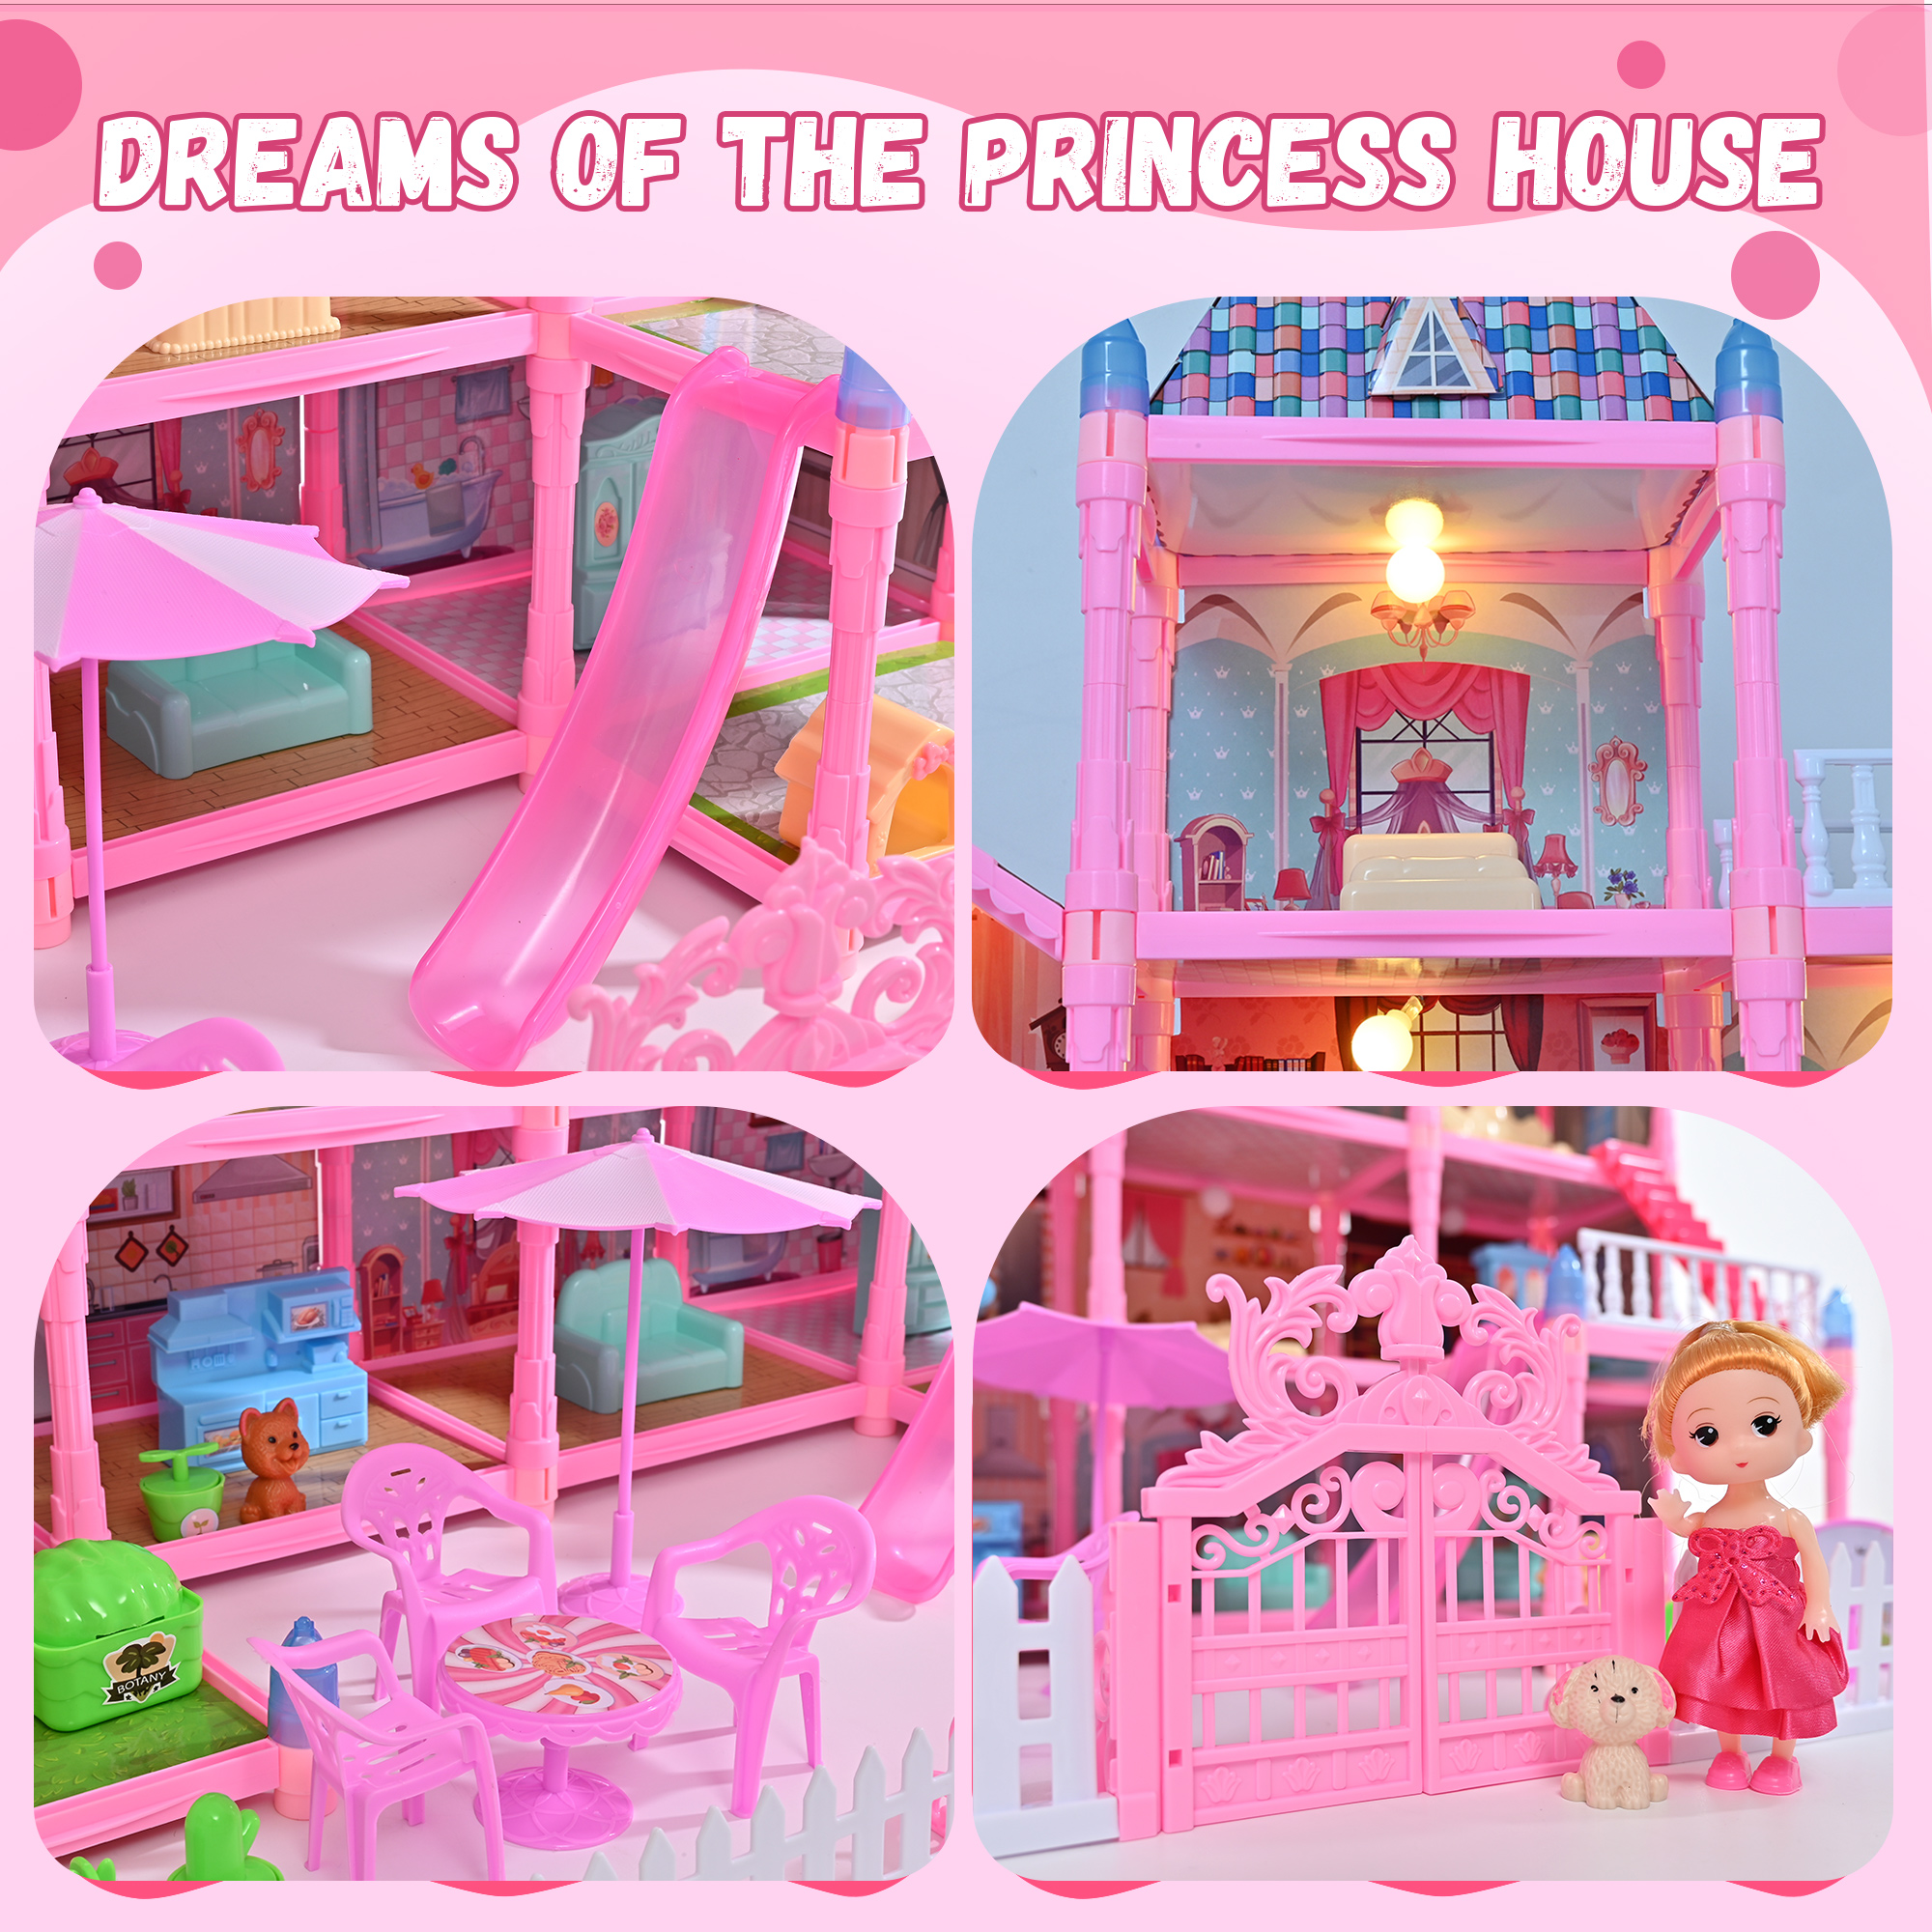 Huge Doll House - 285 PCS Girl Toys Dream Dollhouse 12 Rooms Playhouse with LED Lights Furniture and Accessories, Big Doll House for Princess Age 3-10 - image 3 of 7